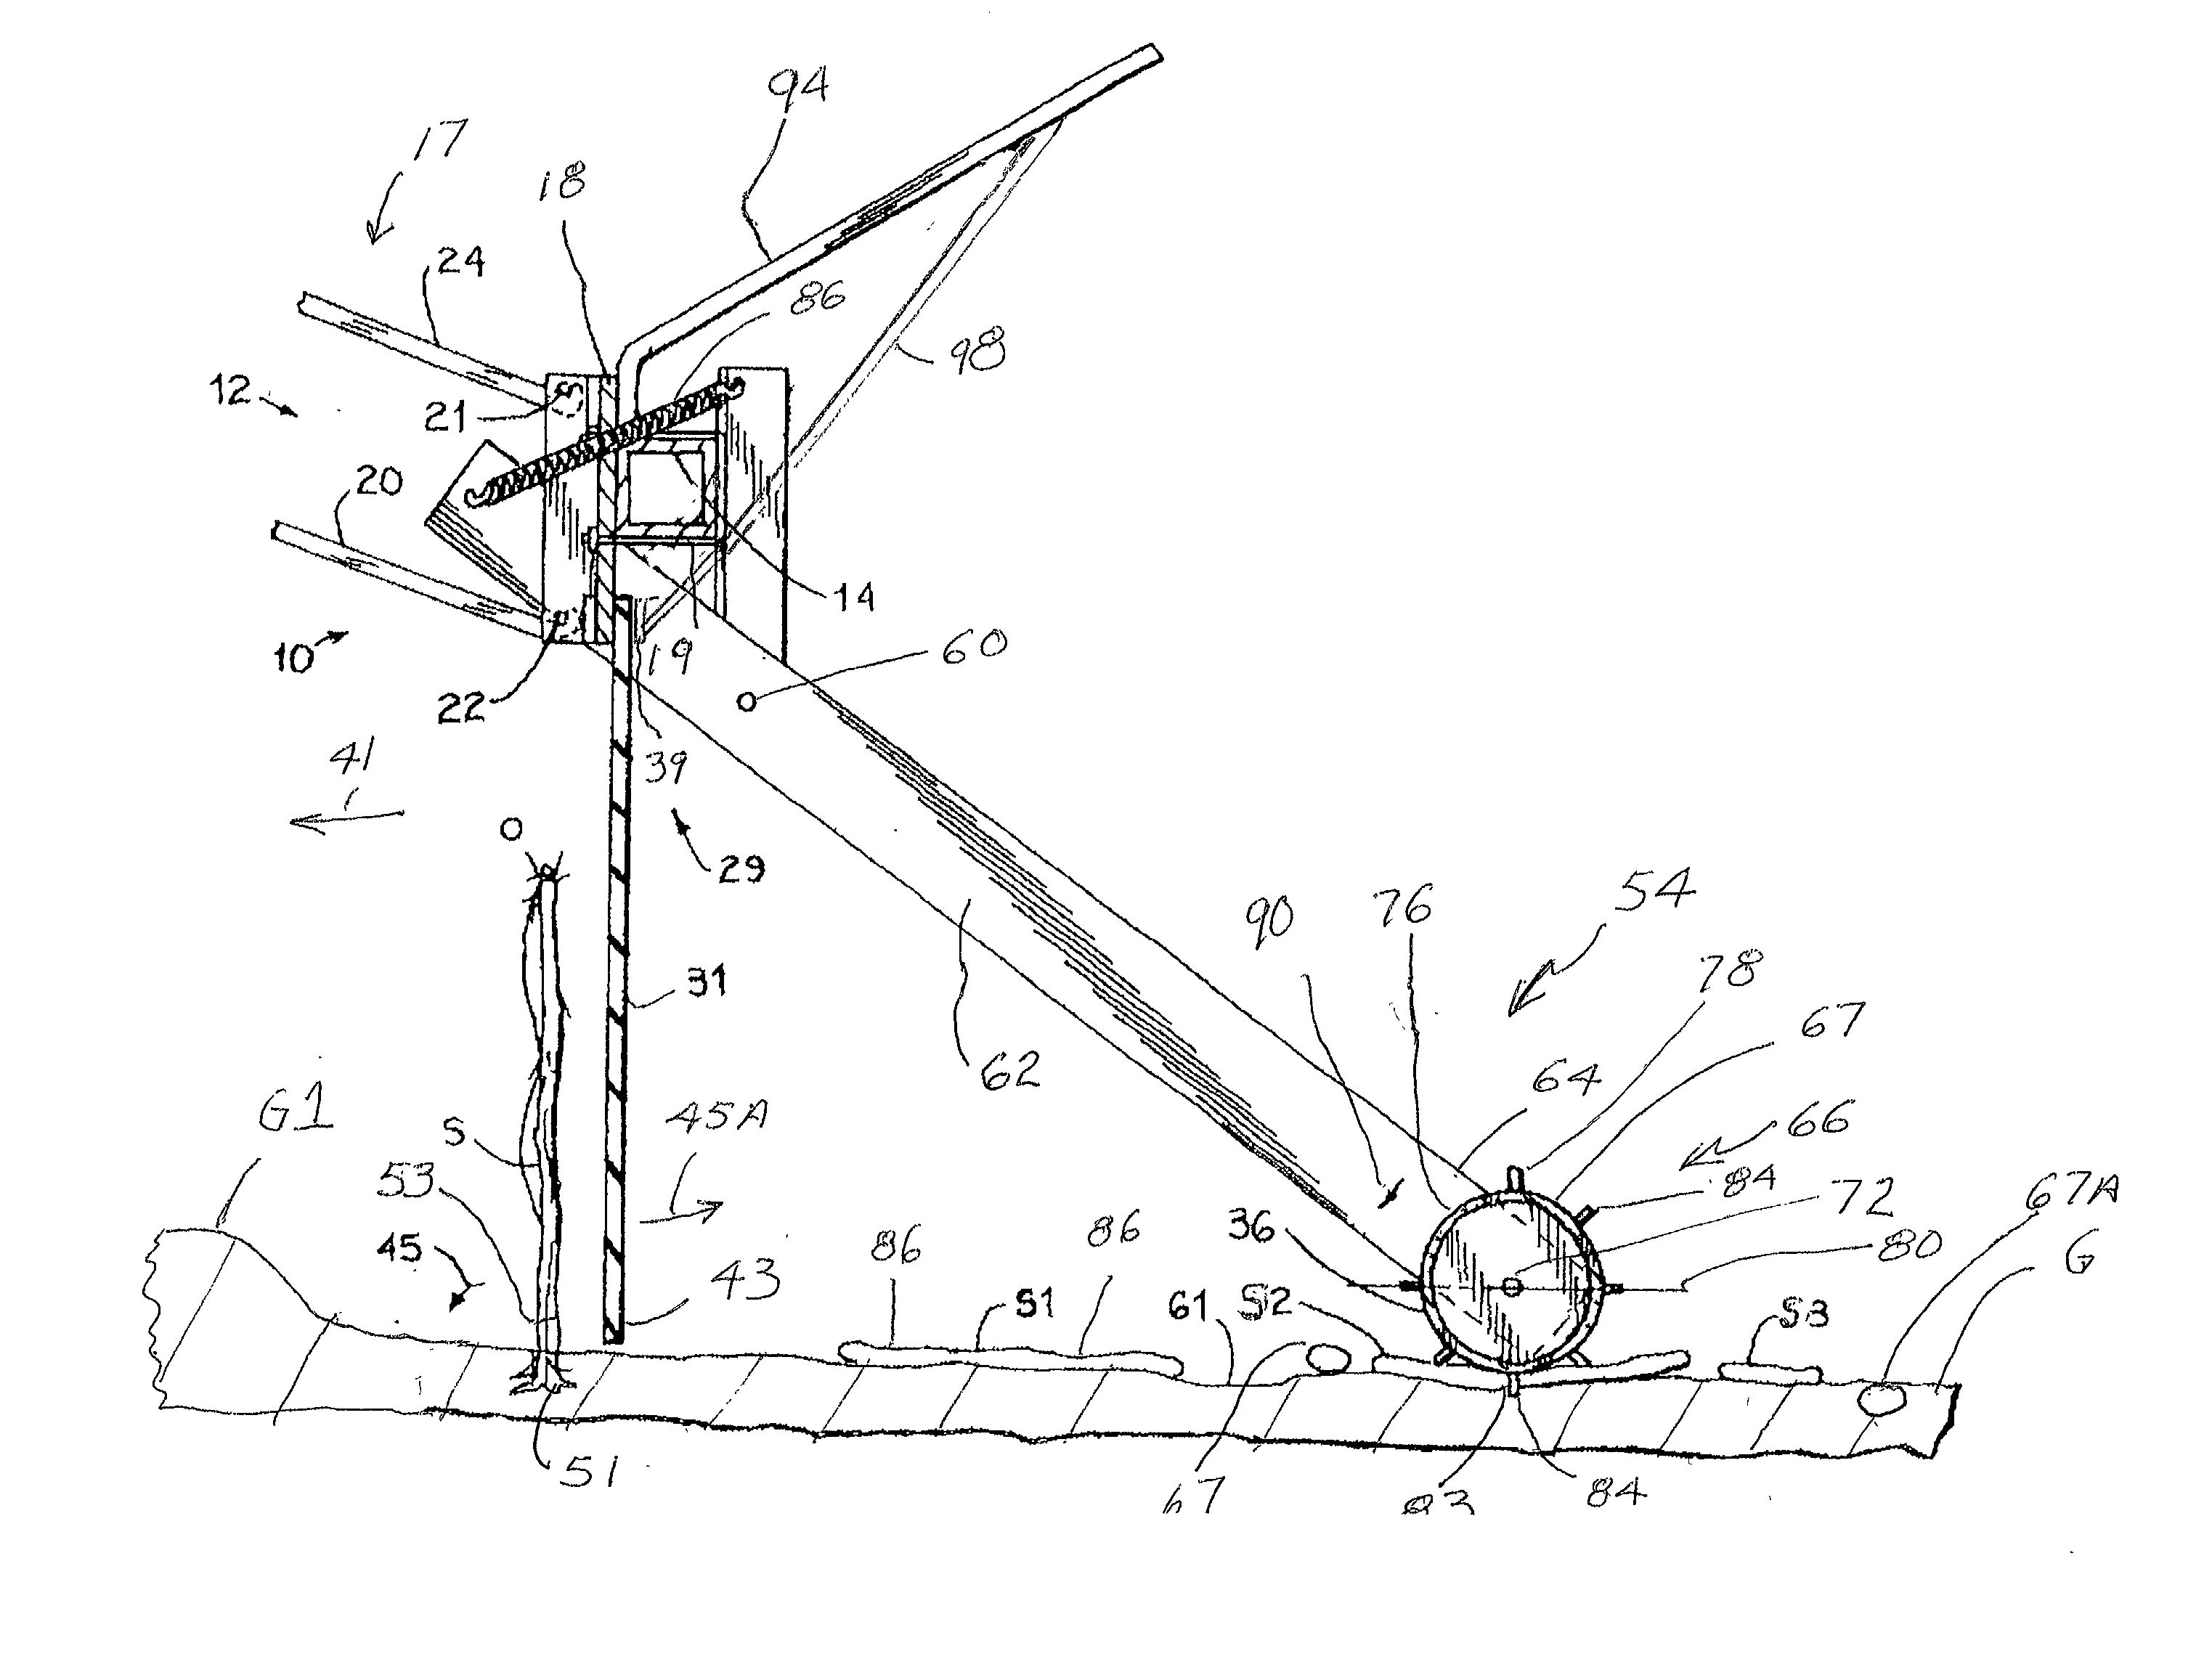 Apparatus and method for knocking down and crushing farm crop residue